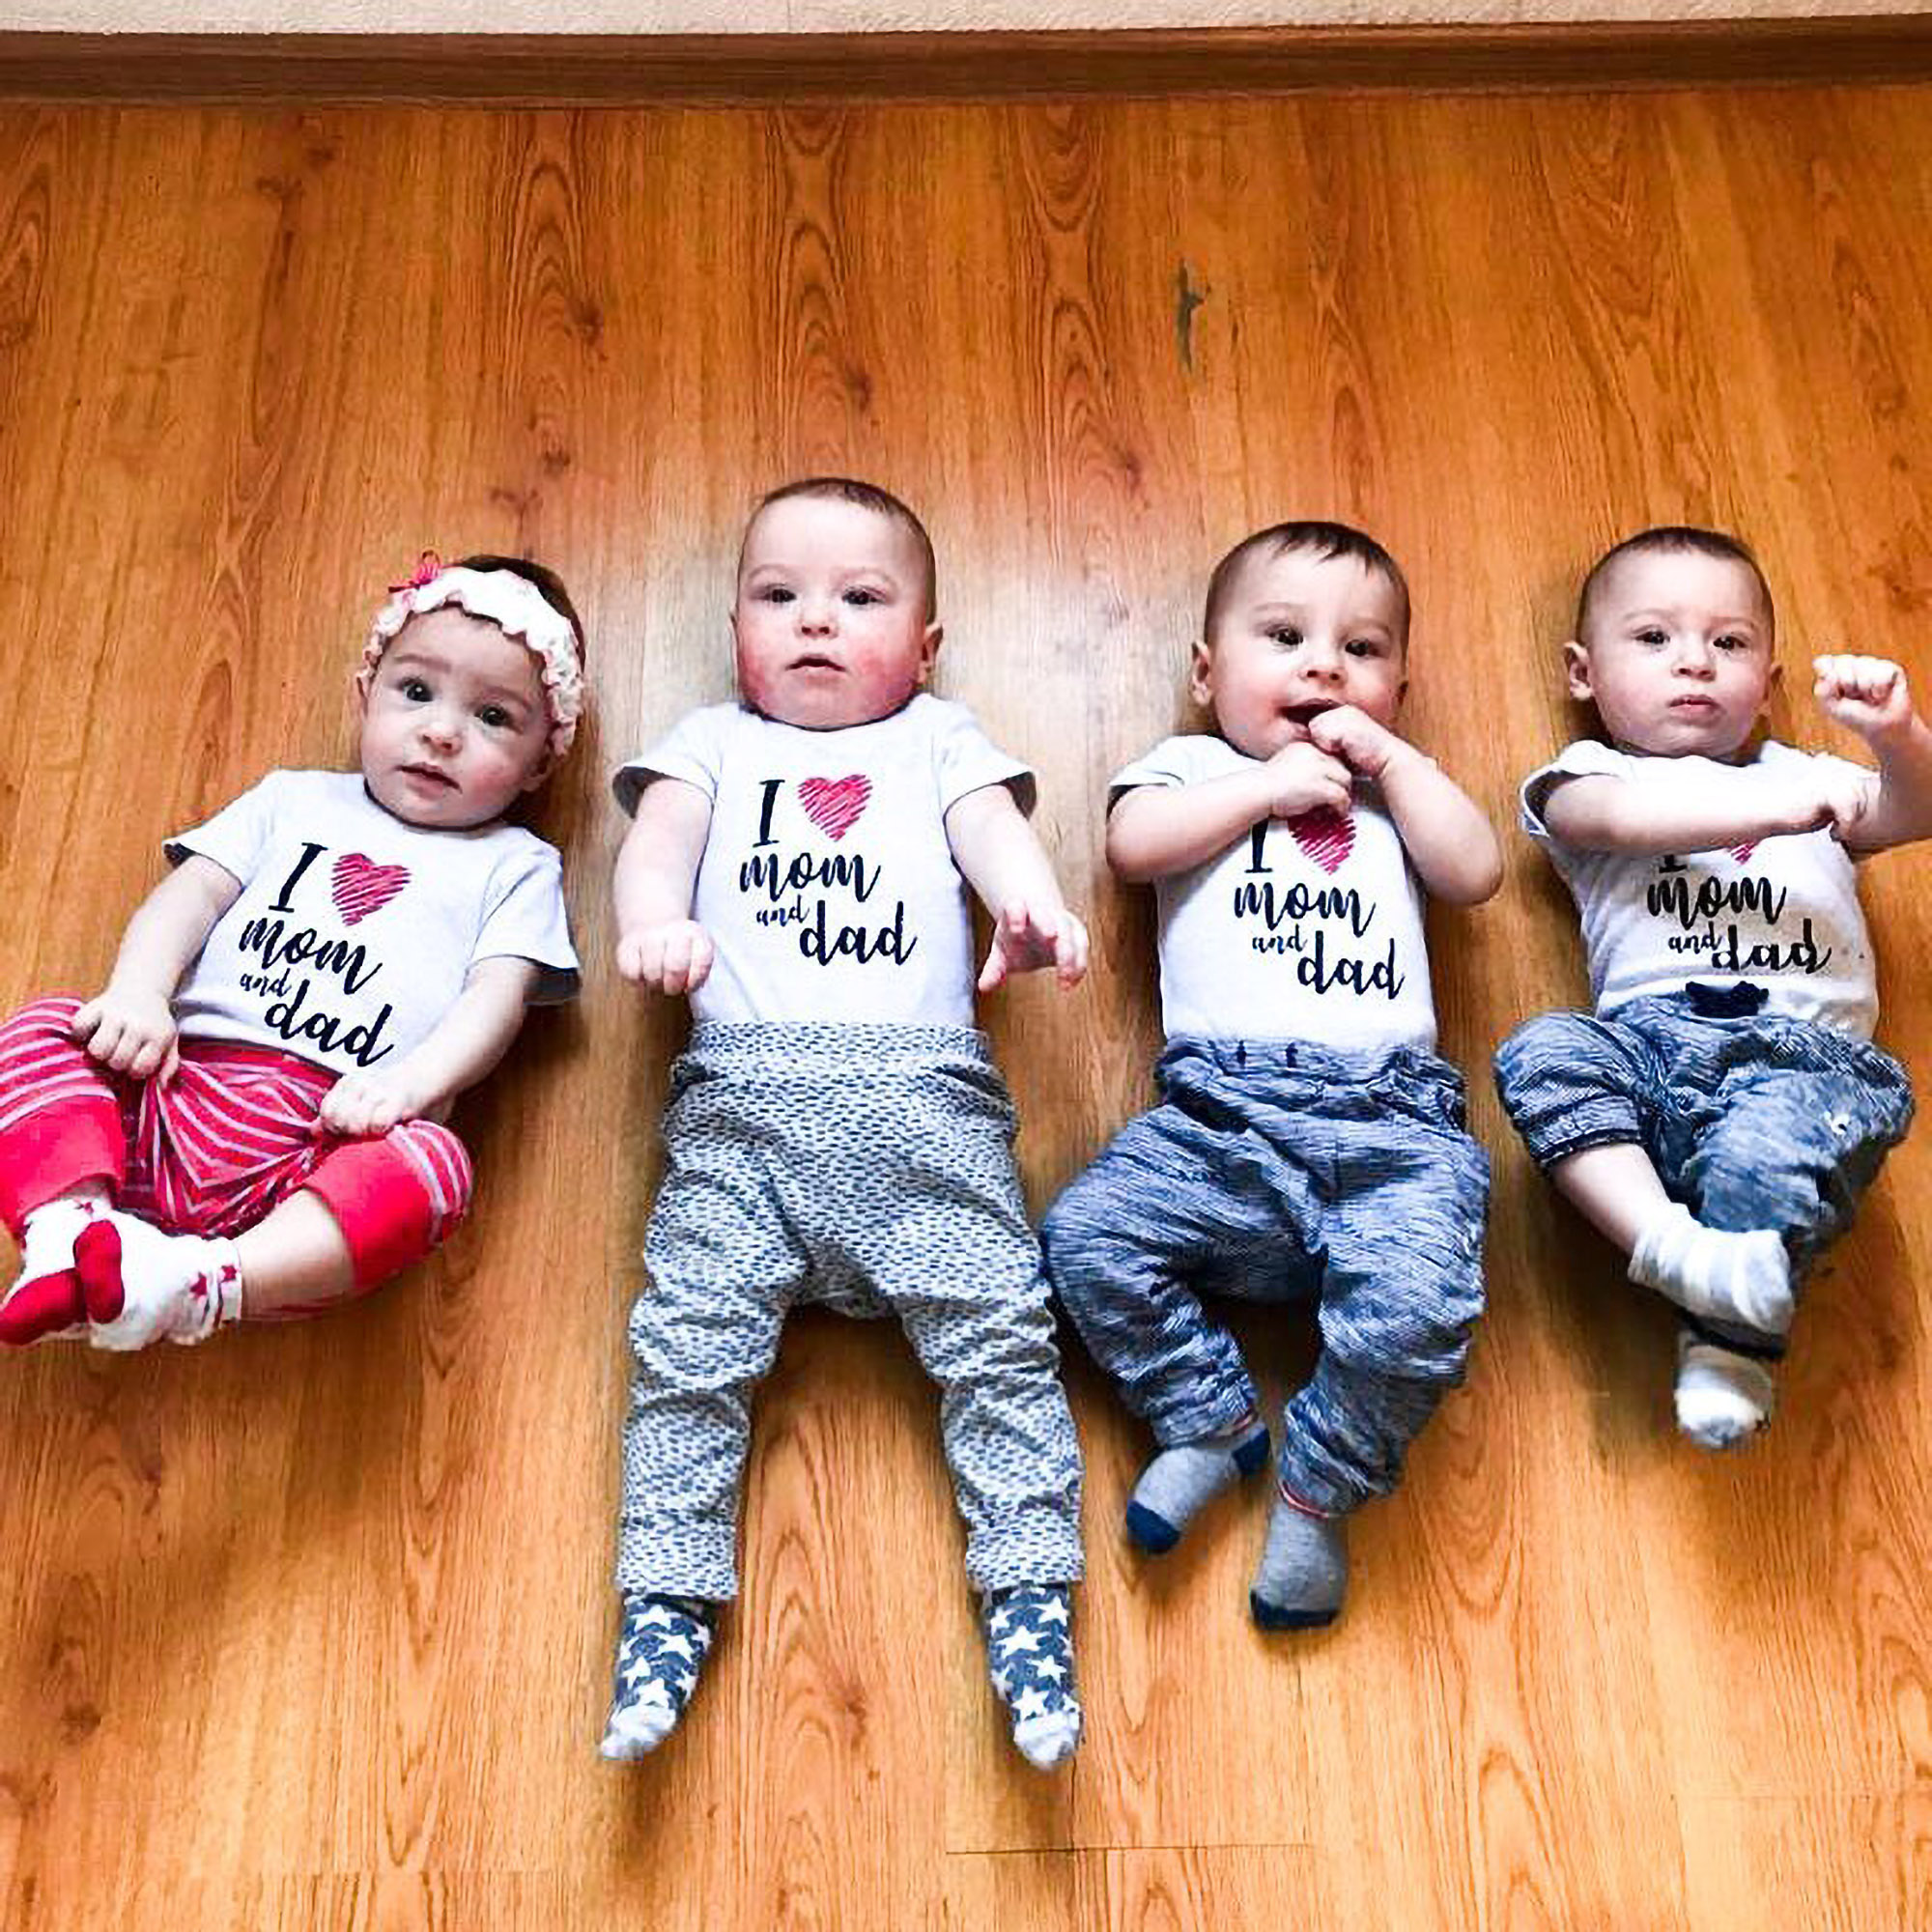 Read more about the article Quadruplet Babies Become Instagram Stars